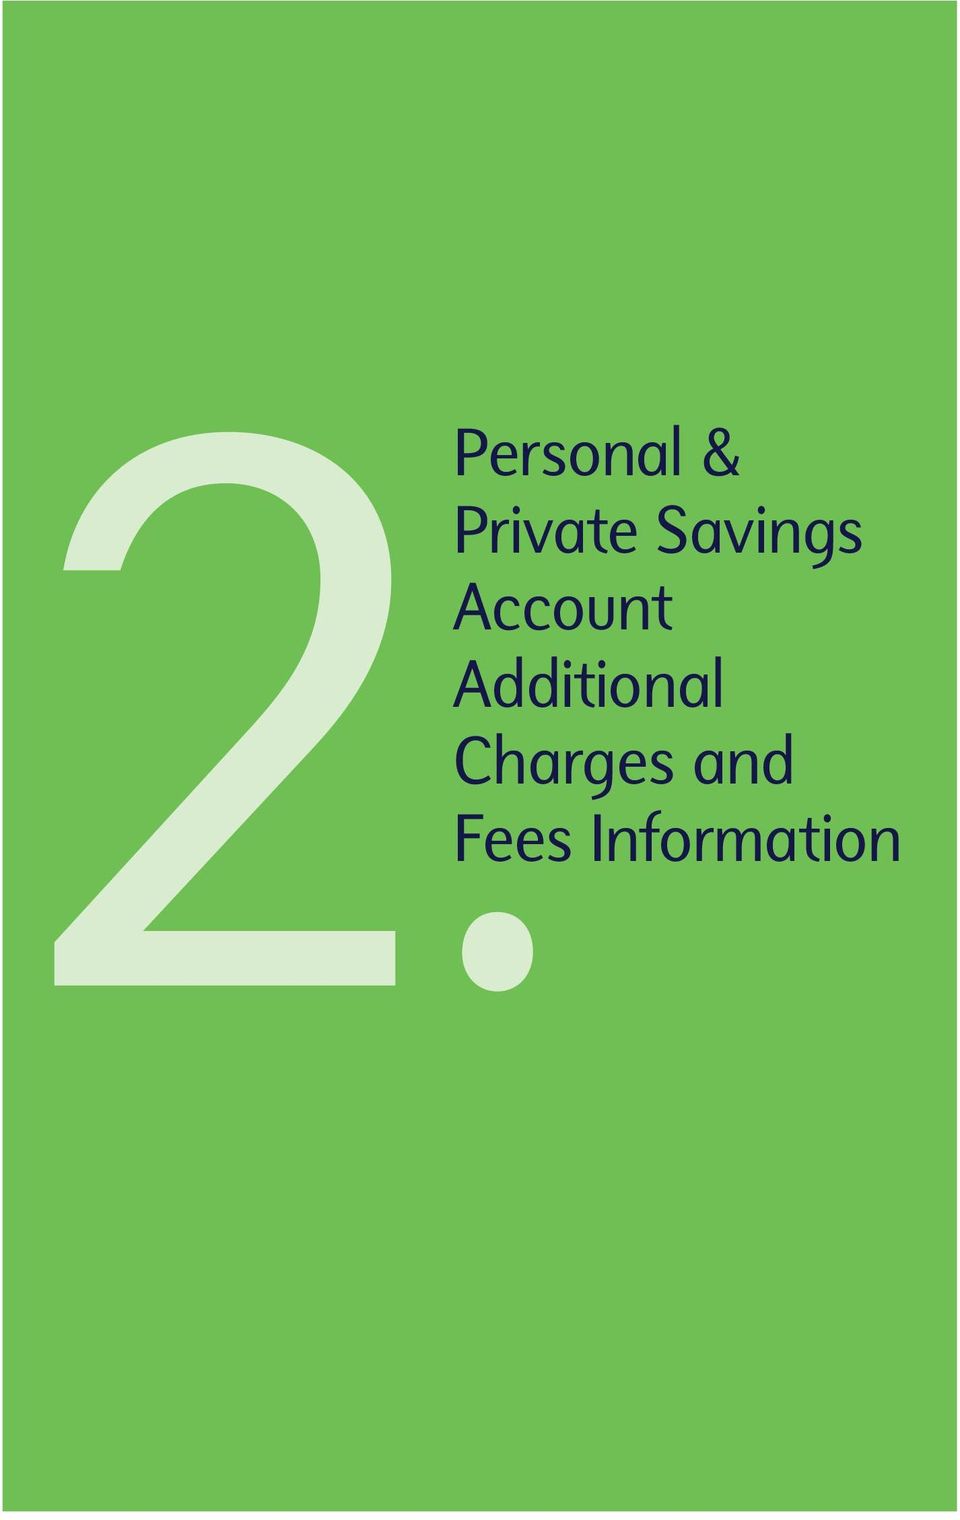 Charges and Fees